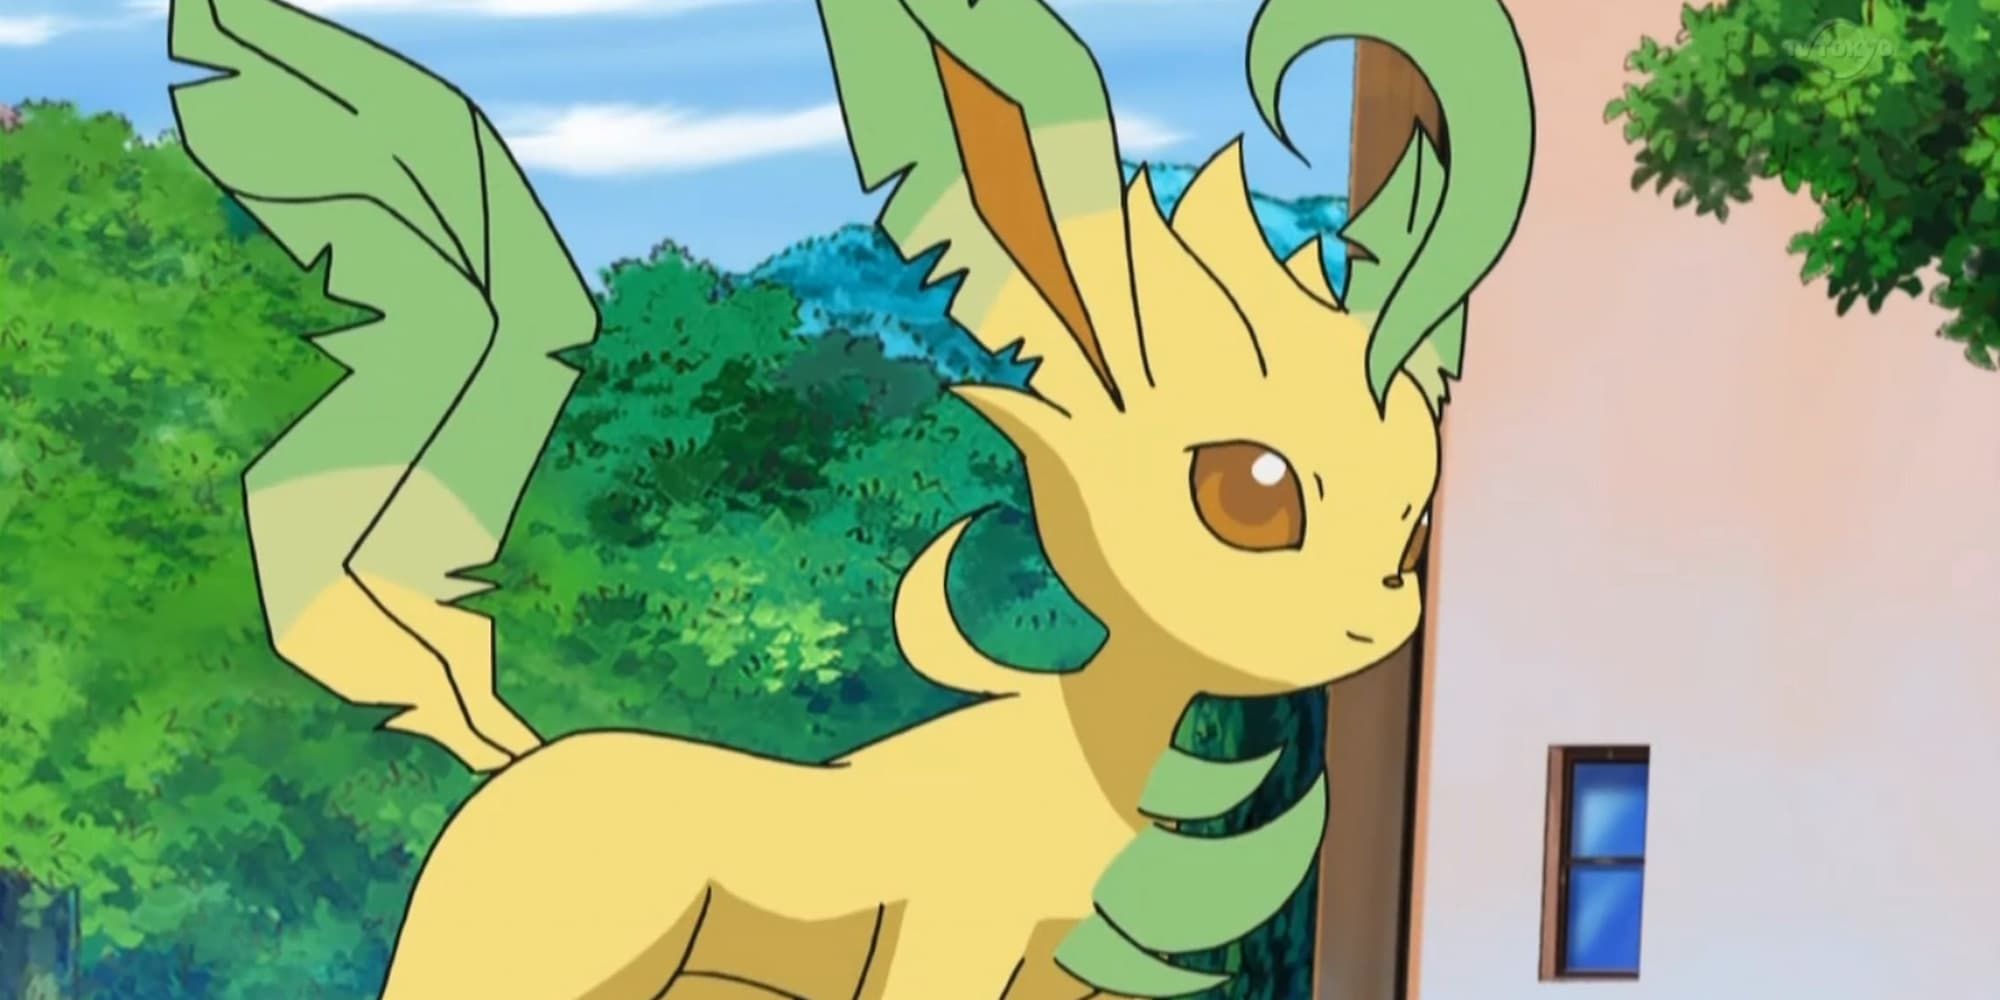 Zoey's Leafeon from the Pokemon anime stands proud in front of a building.